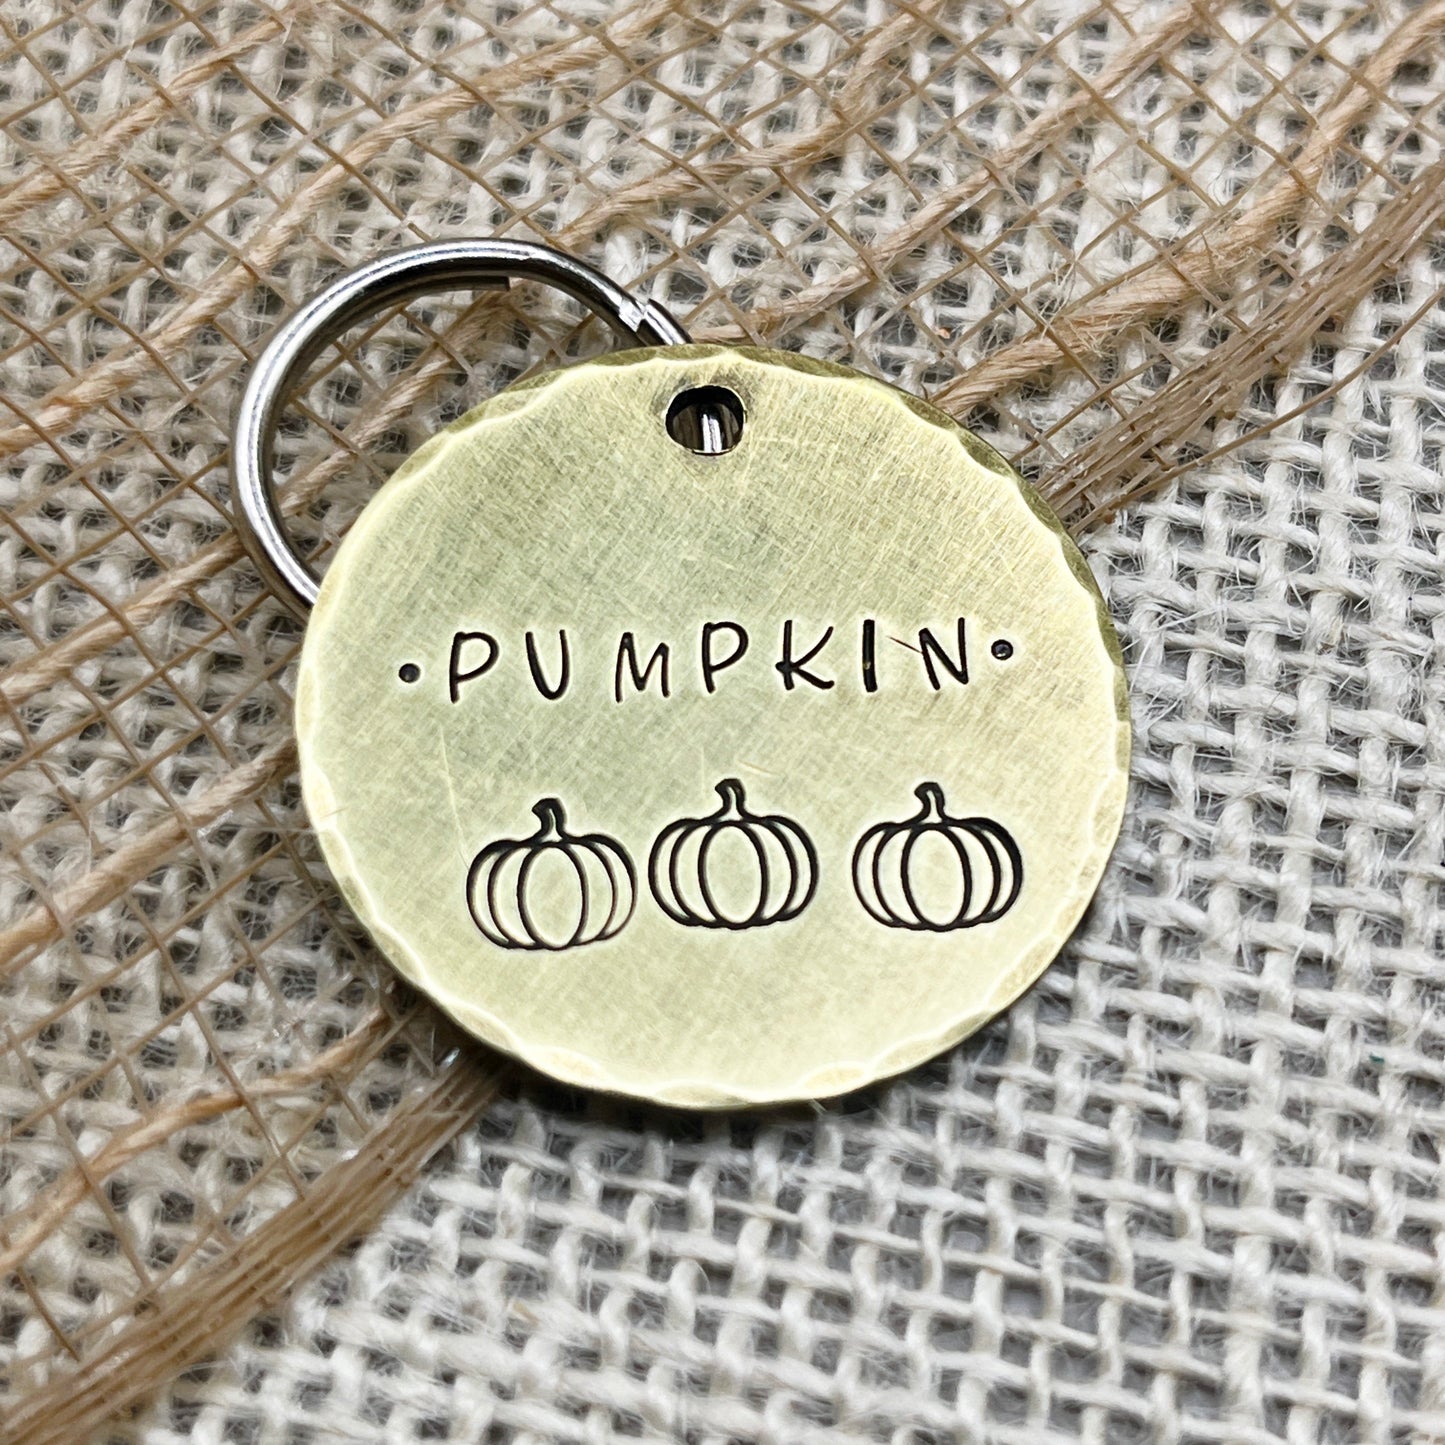 Pumpkin Tag - Large Brass Dog Tag - Tag for Dogs and Cats